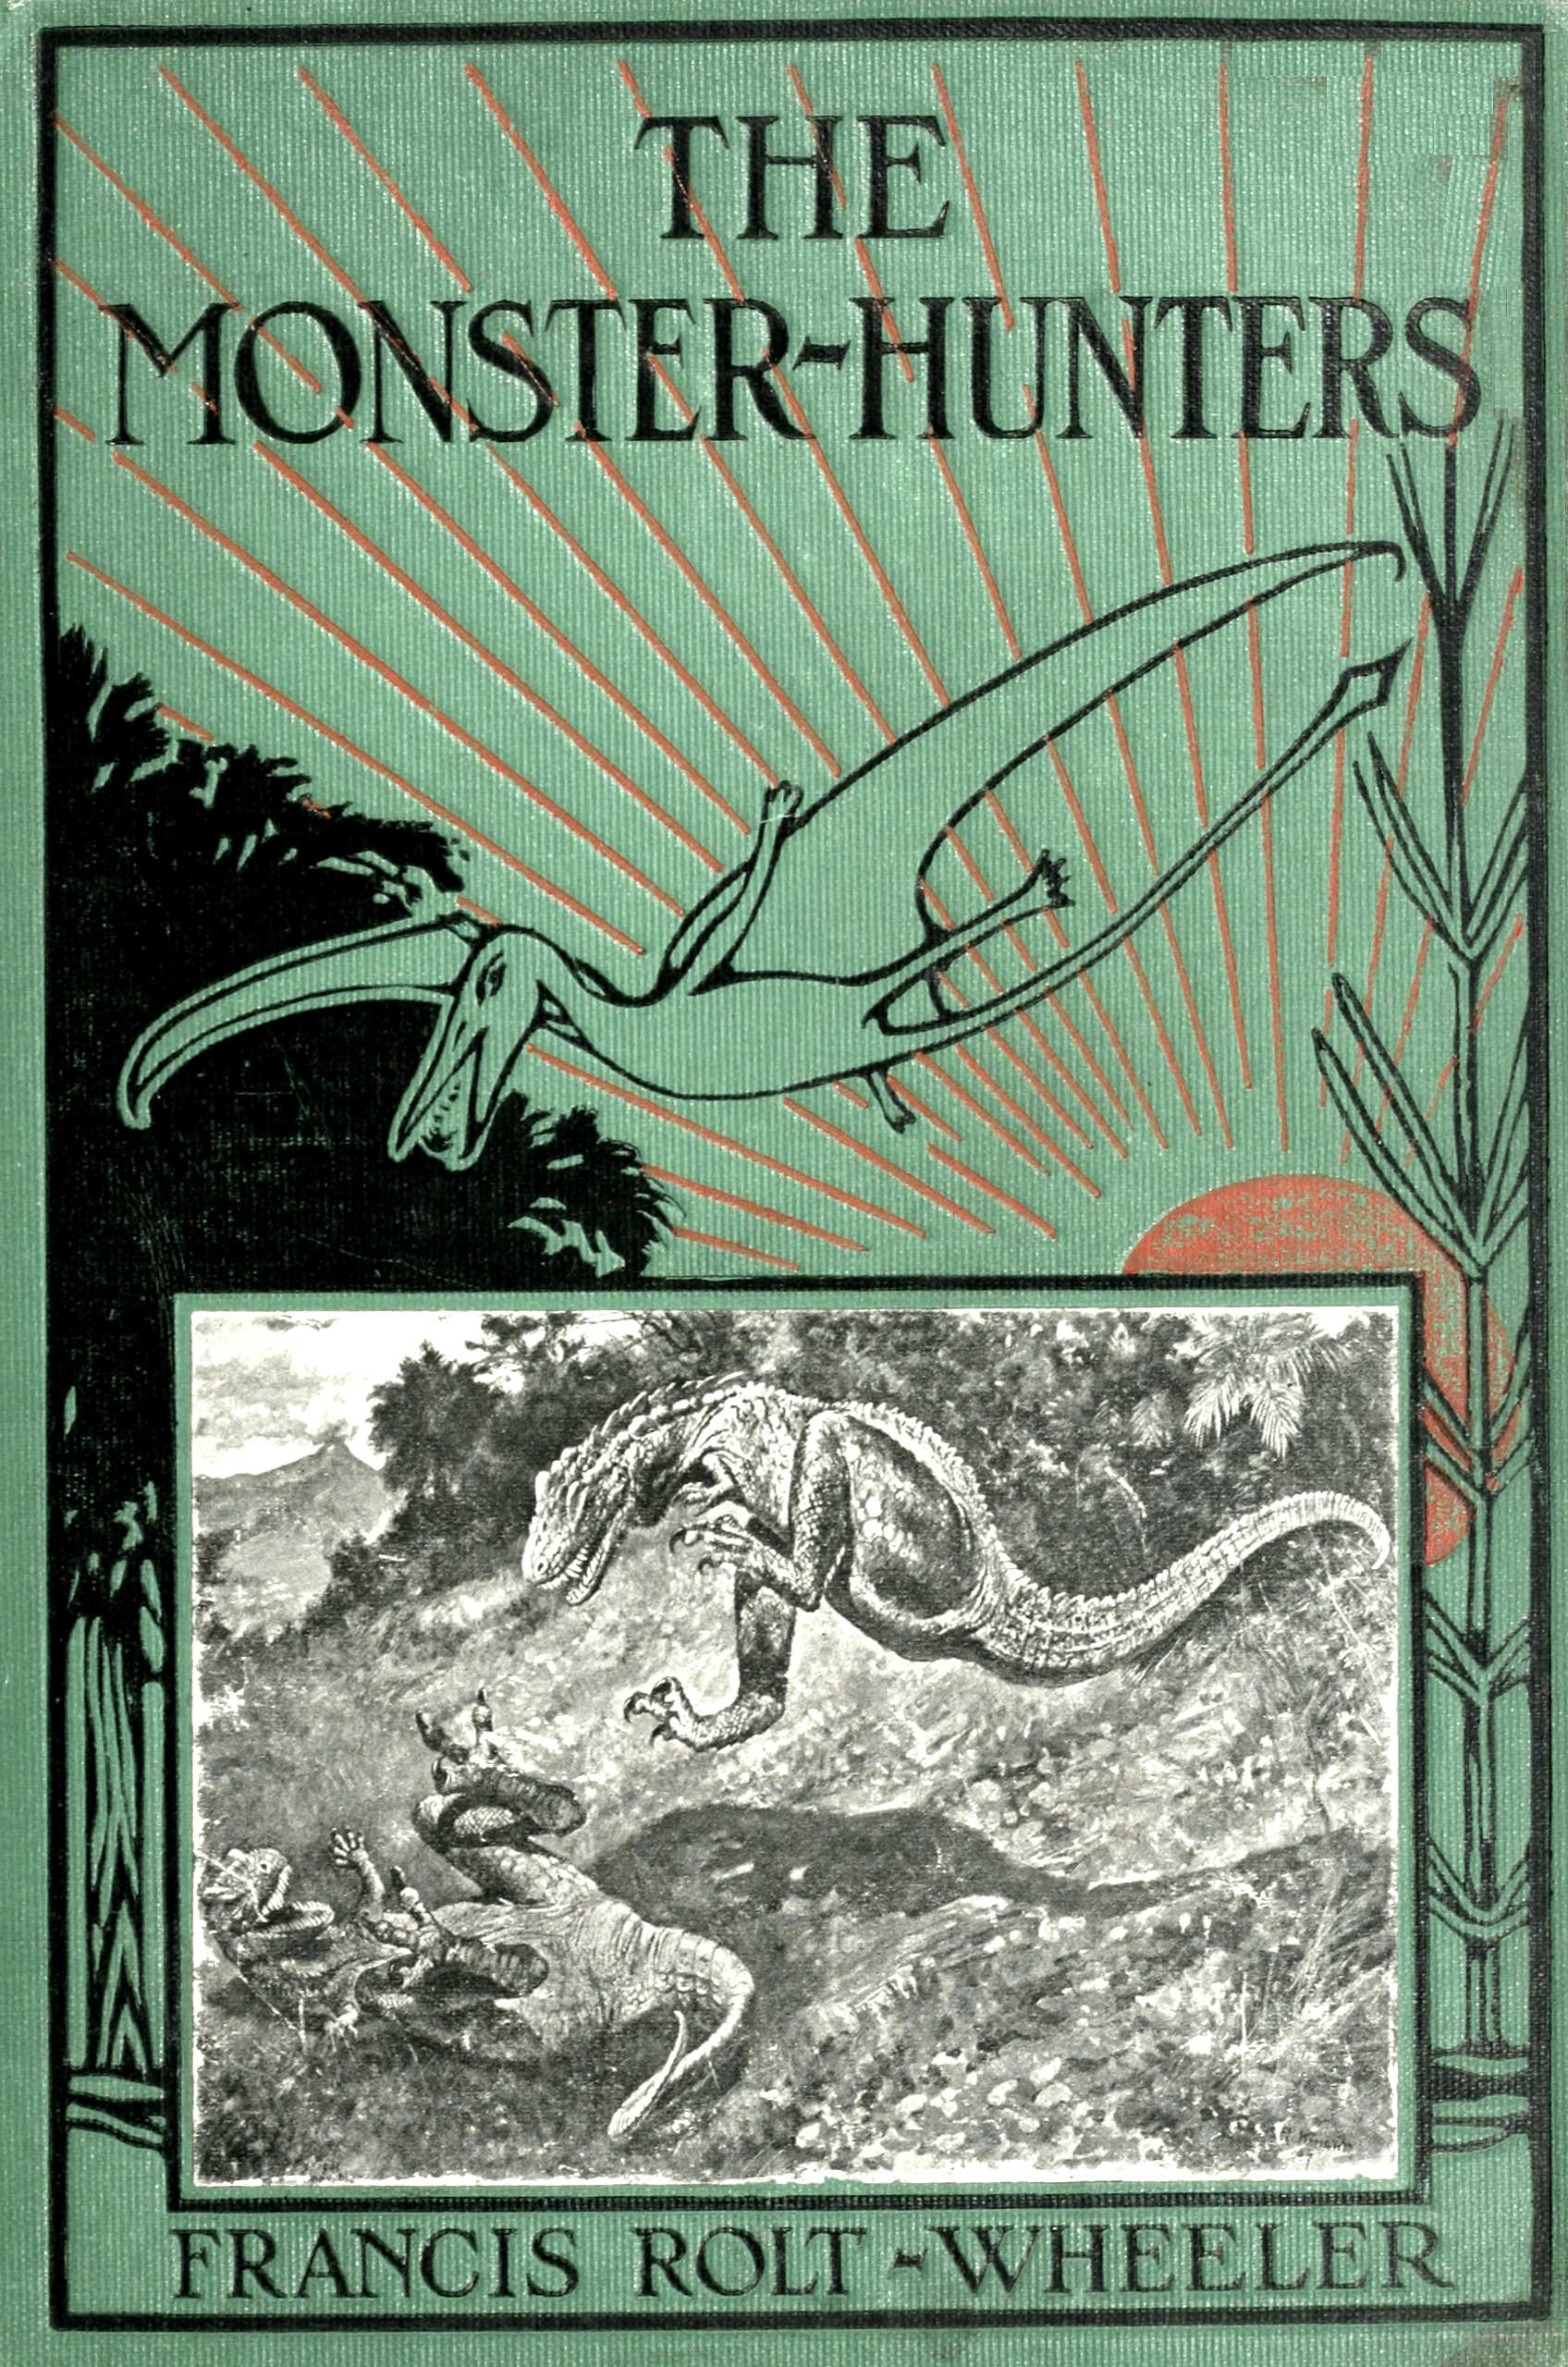 The Monster-hunters | Project Gutenberg